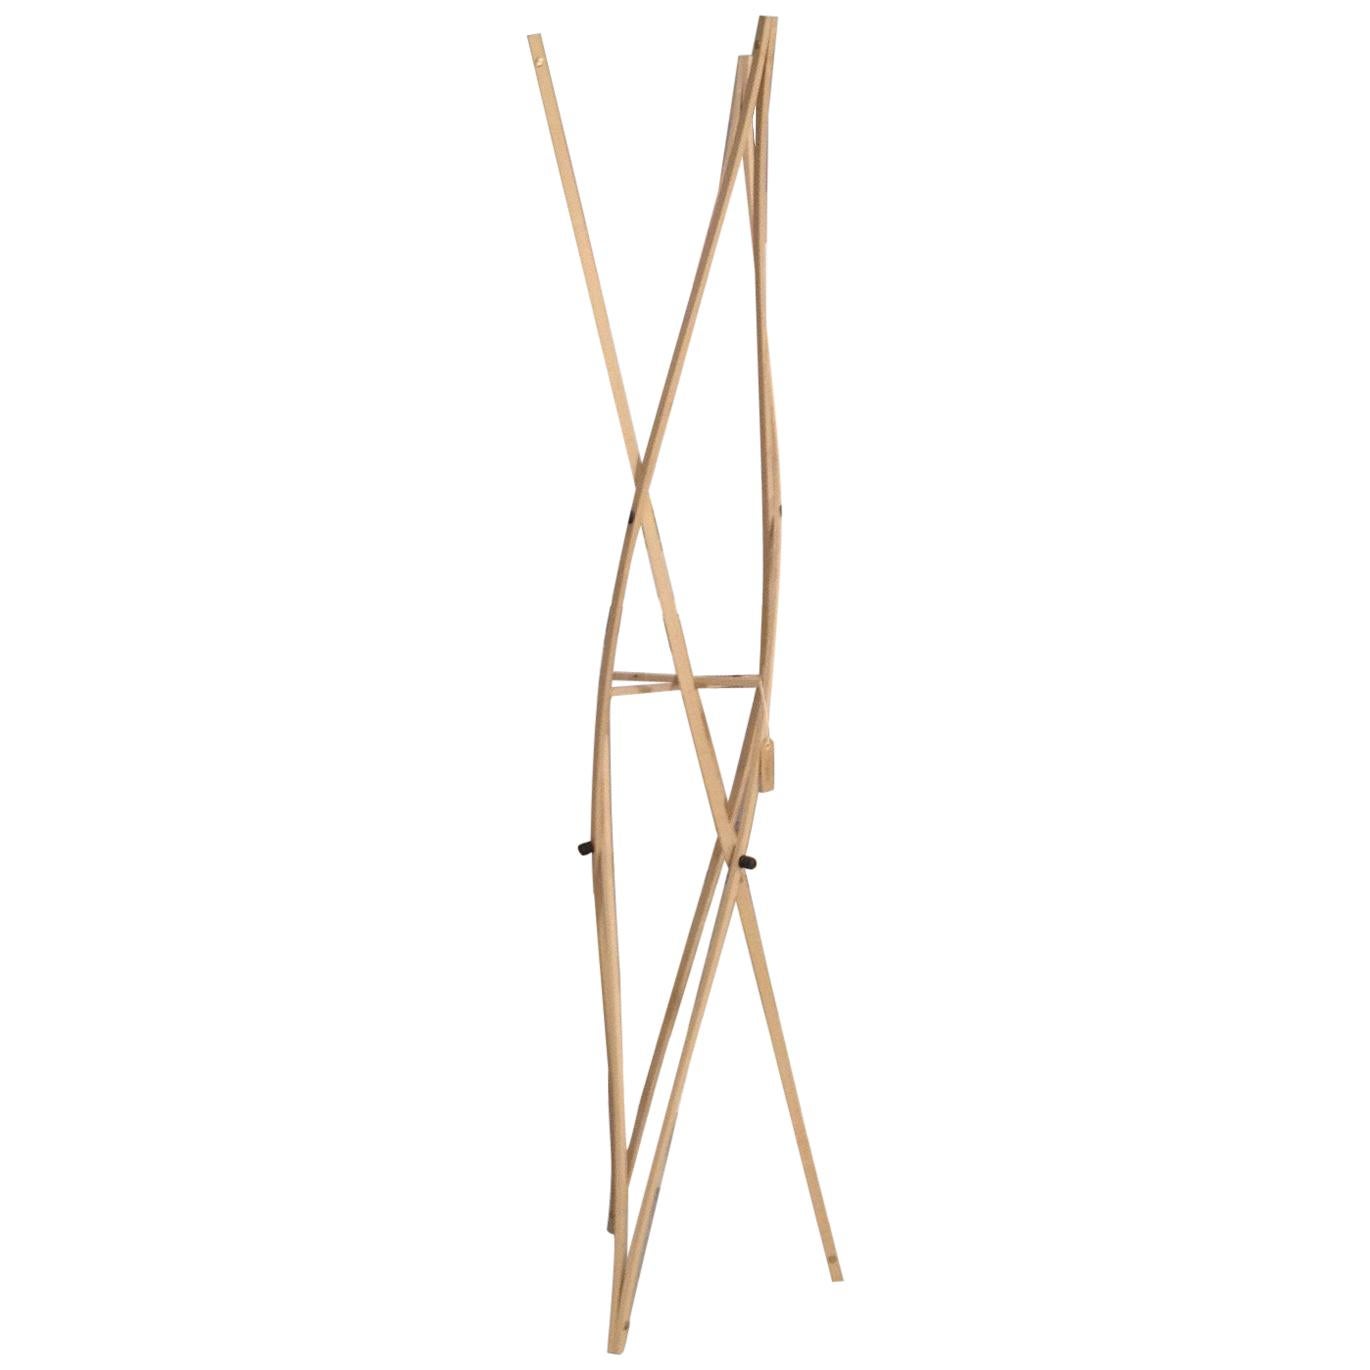 Francesca is a Freestanding Wooden Coat Rack, Characterized by Tension and Light im Angebot